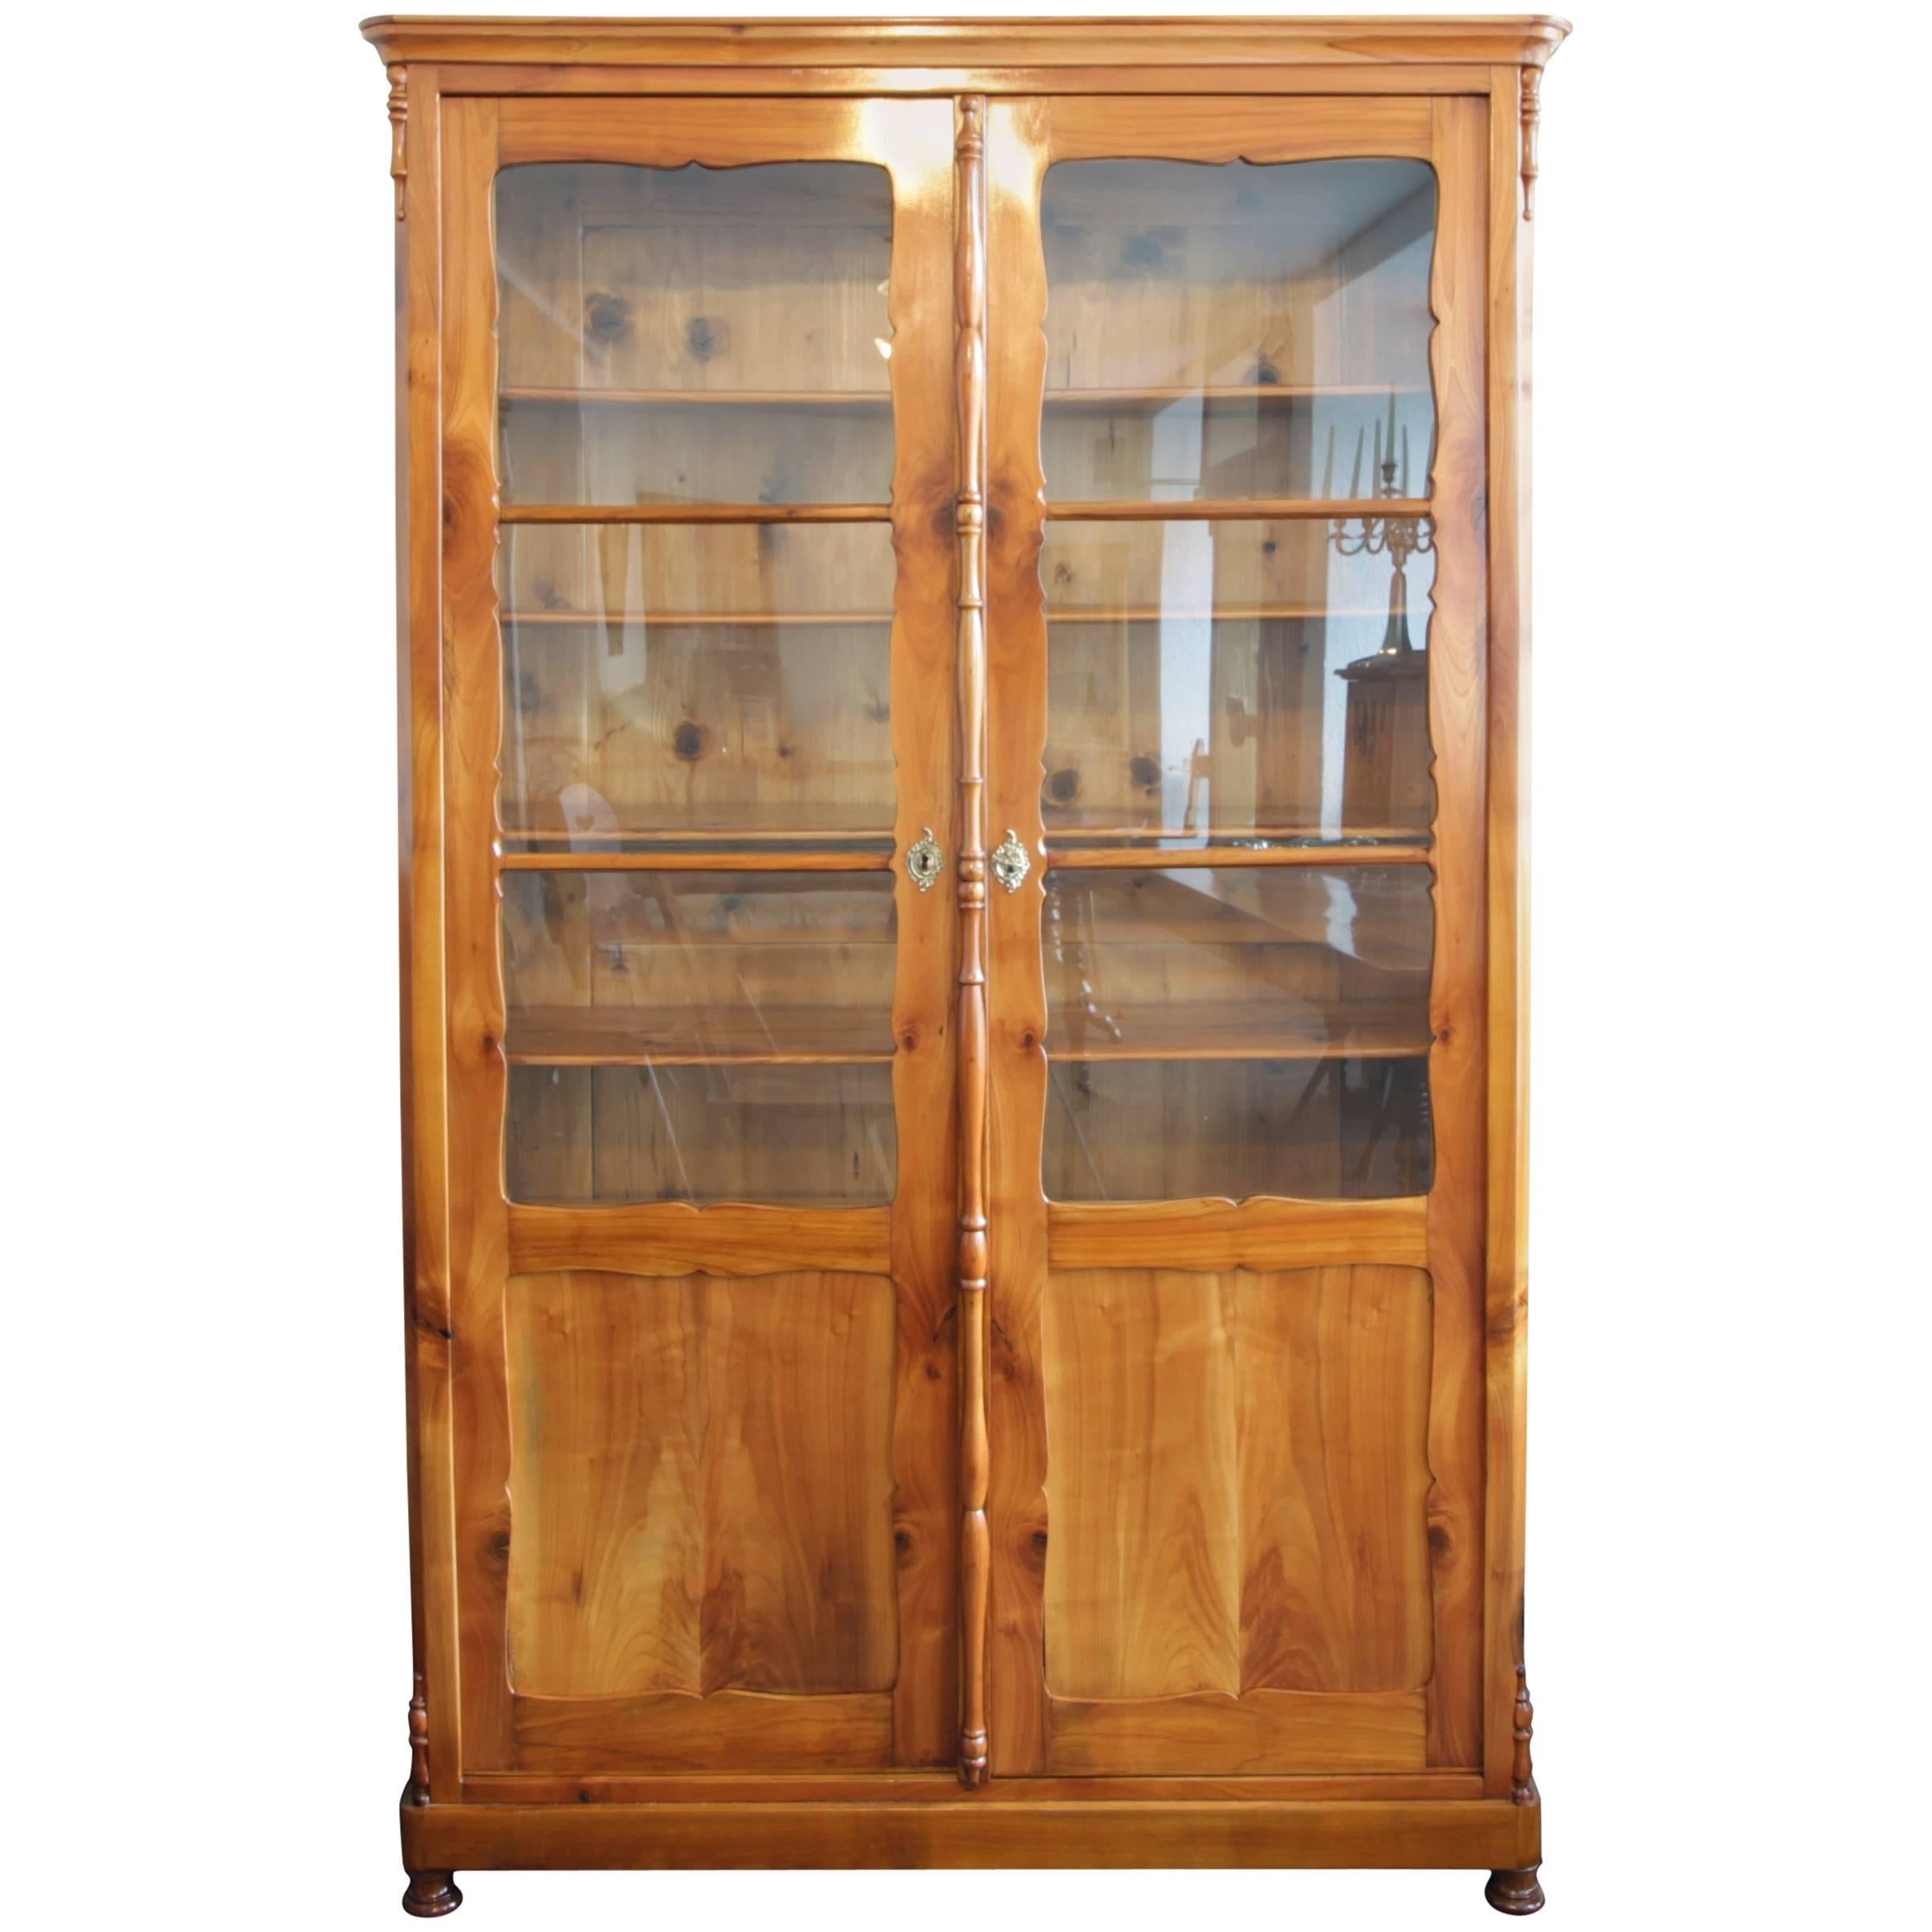 19th Century Late Biedermeier Cherrywood Bookcase from Germany